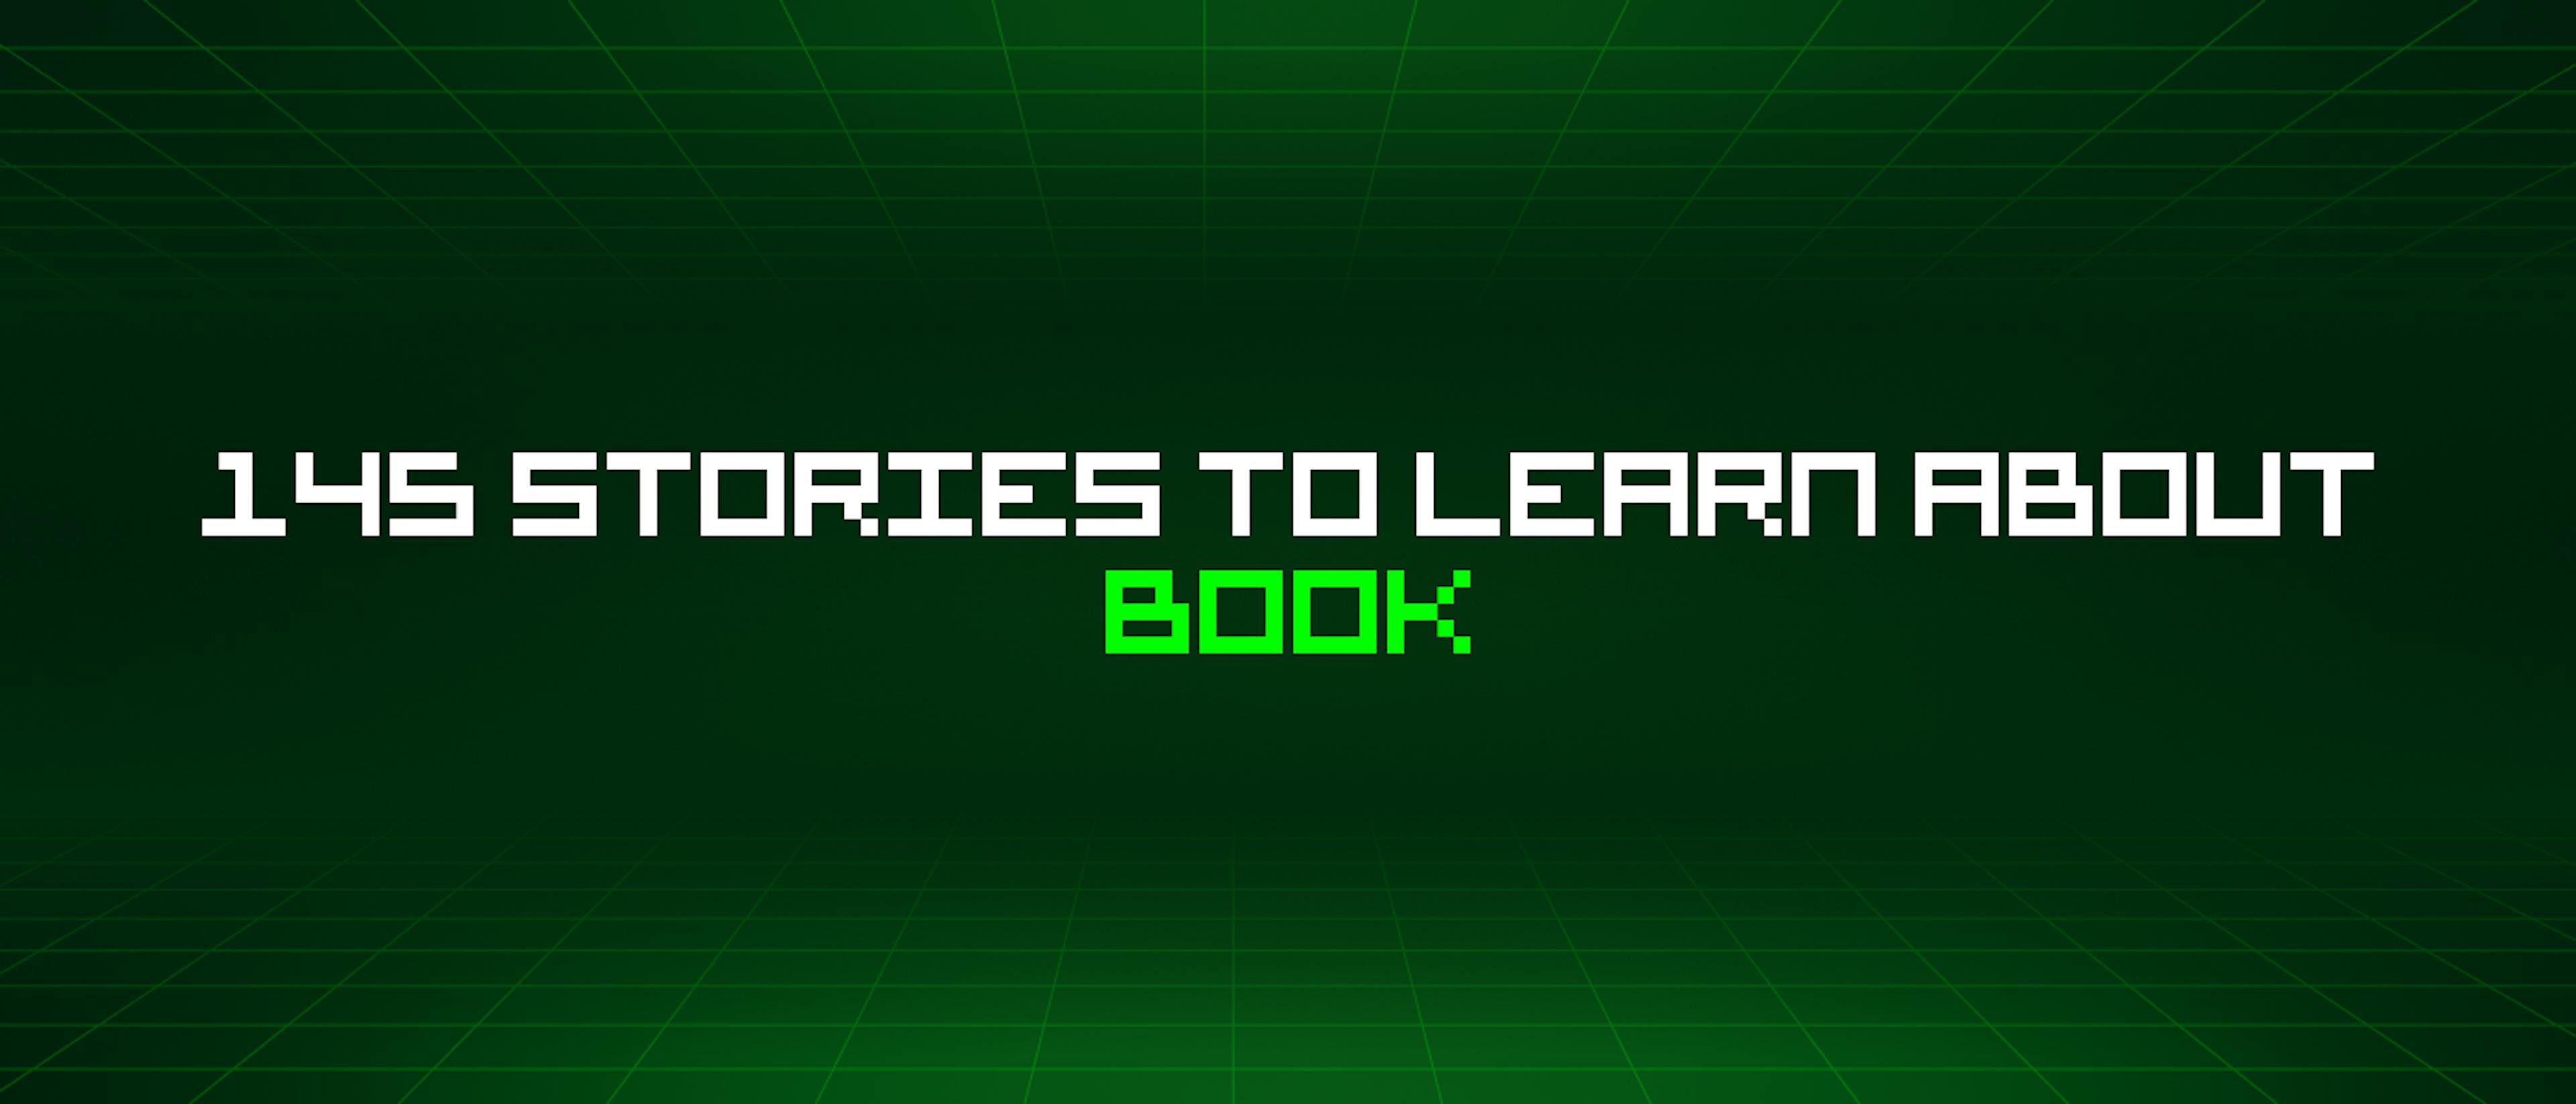 featured image - 145 Stories To Learn About Book